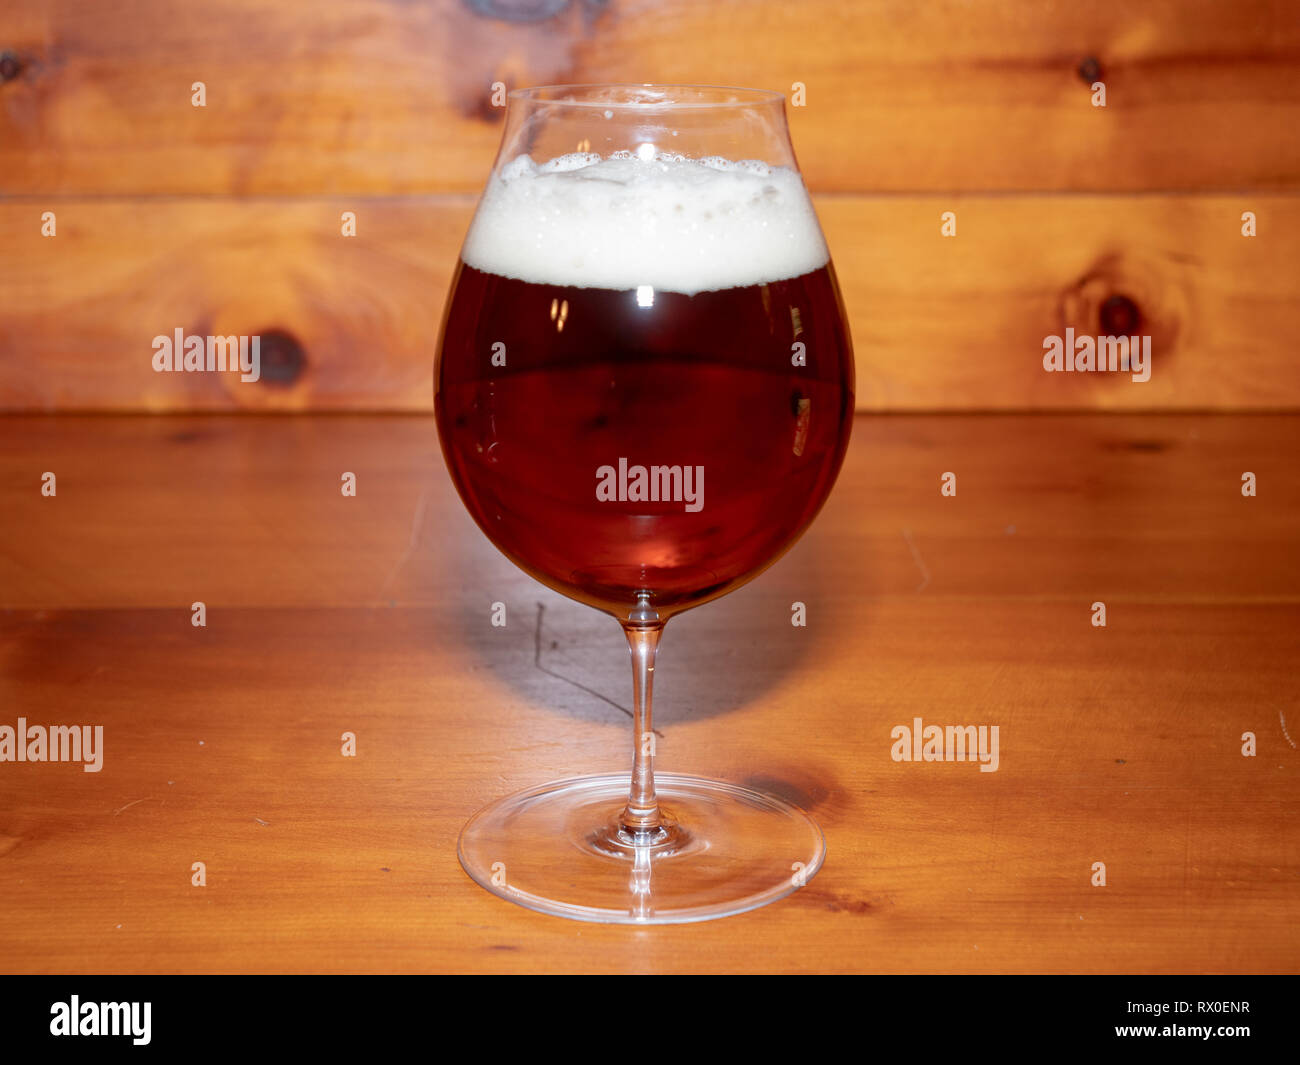 Refreshing, Amber Ale or Beer in a Tulip Shaped Glass on a Wood Background Stock Photo